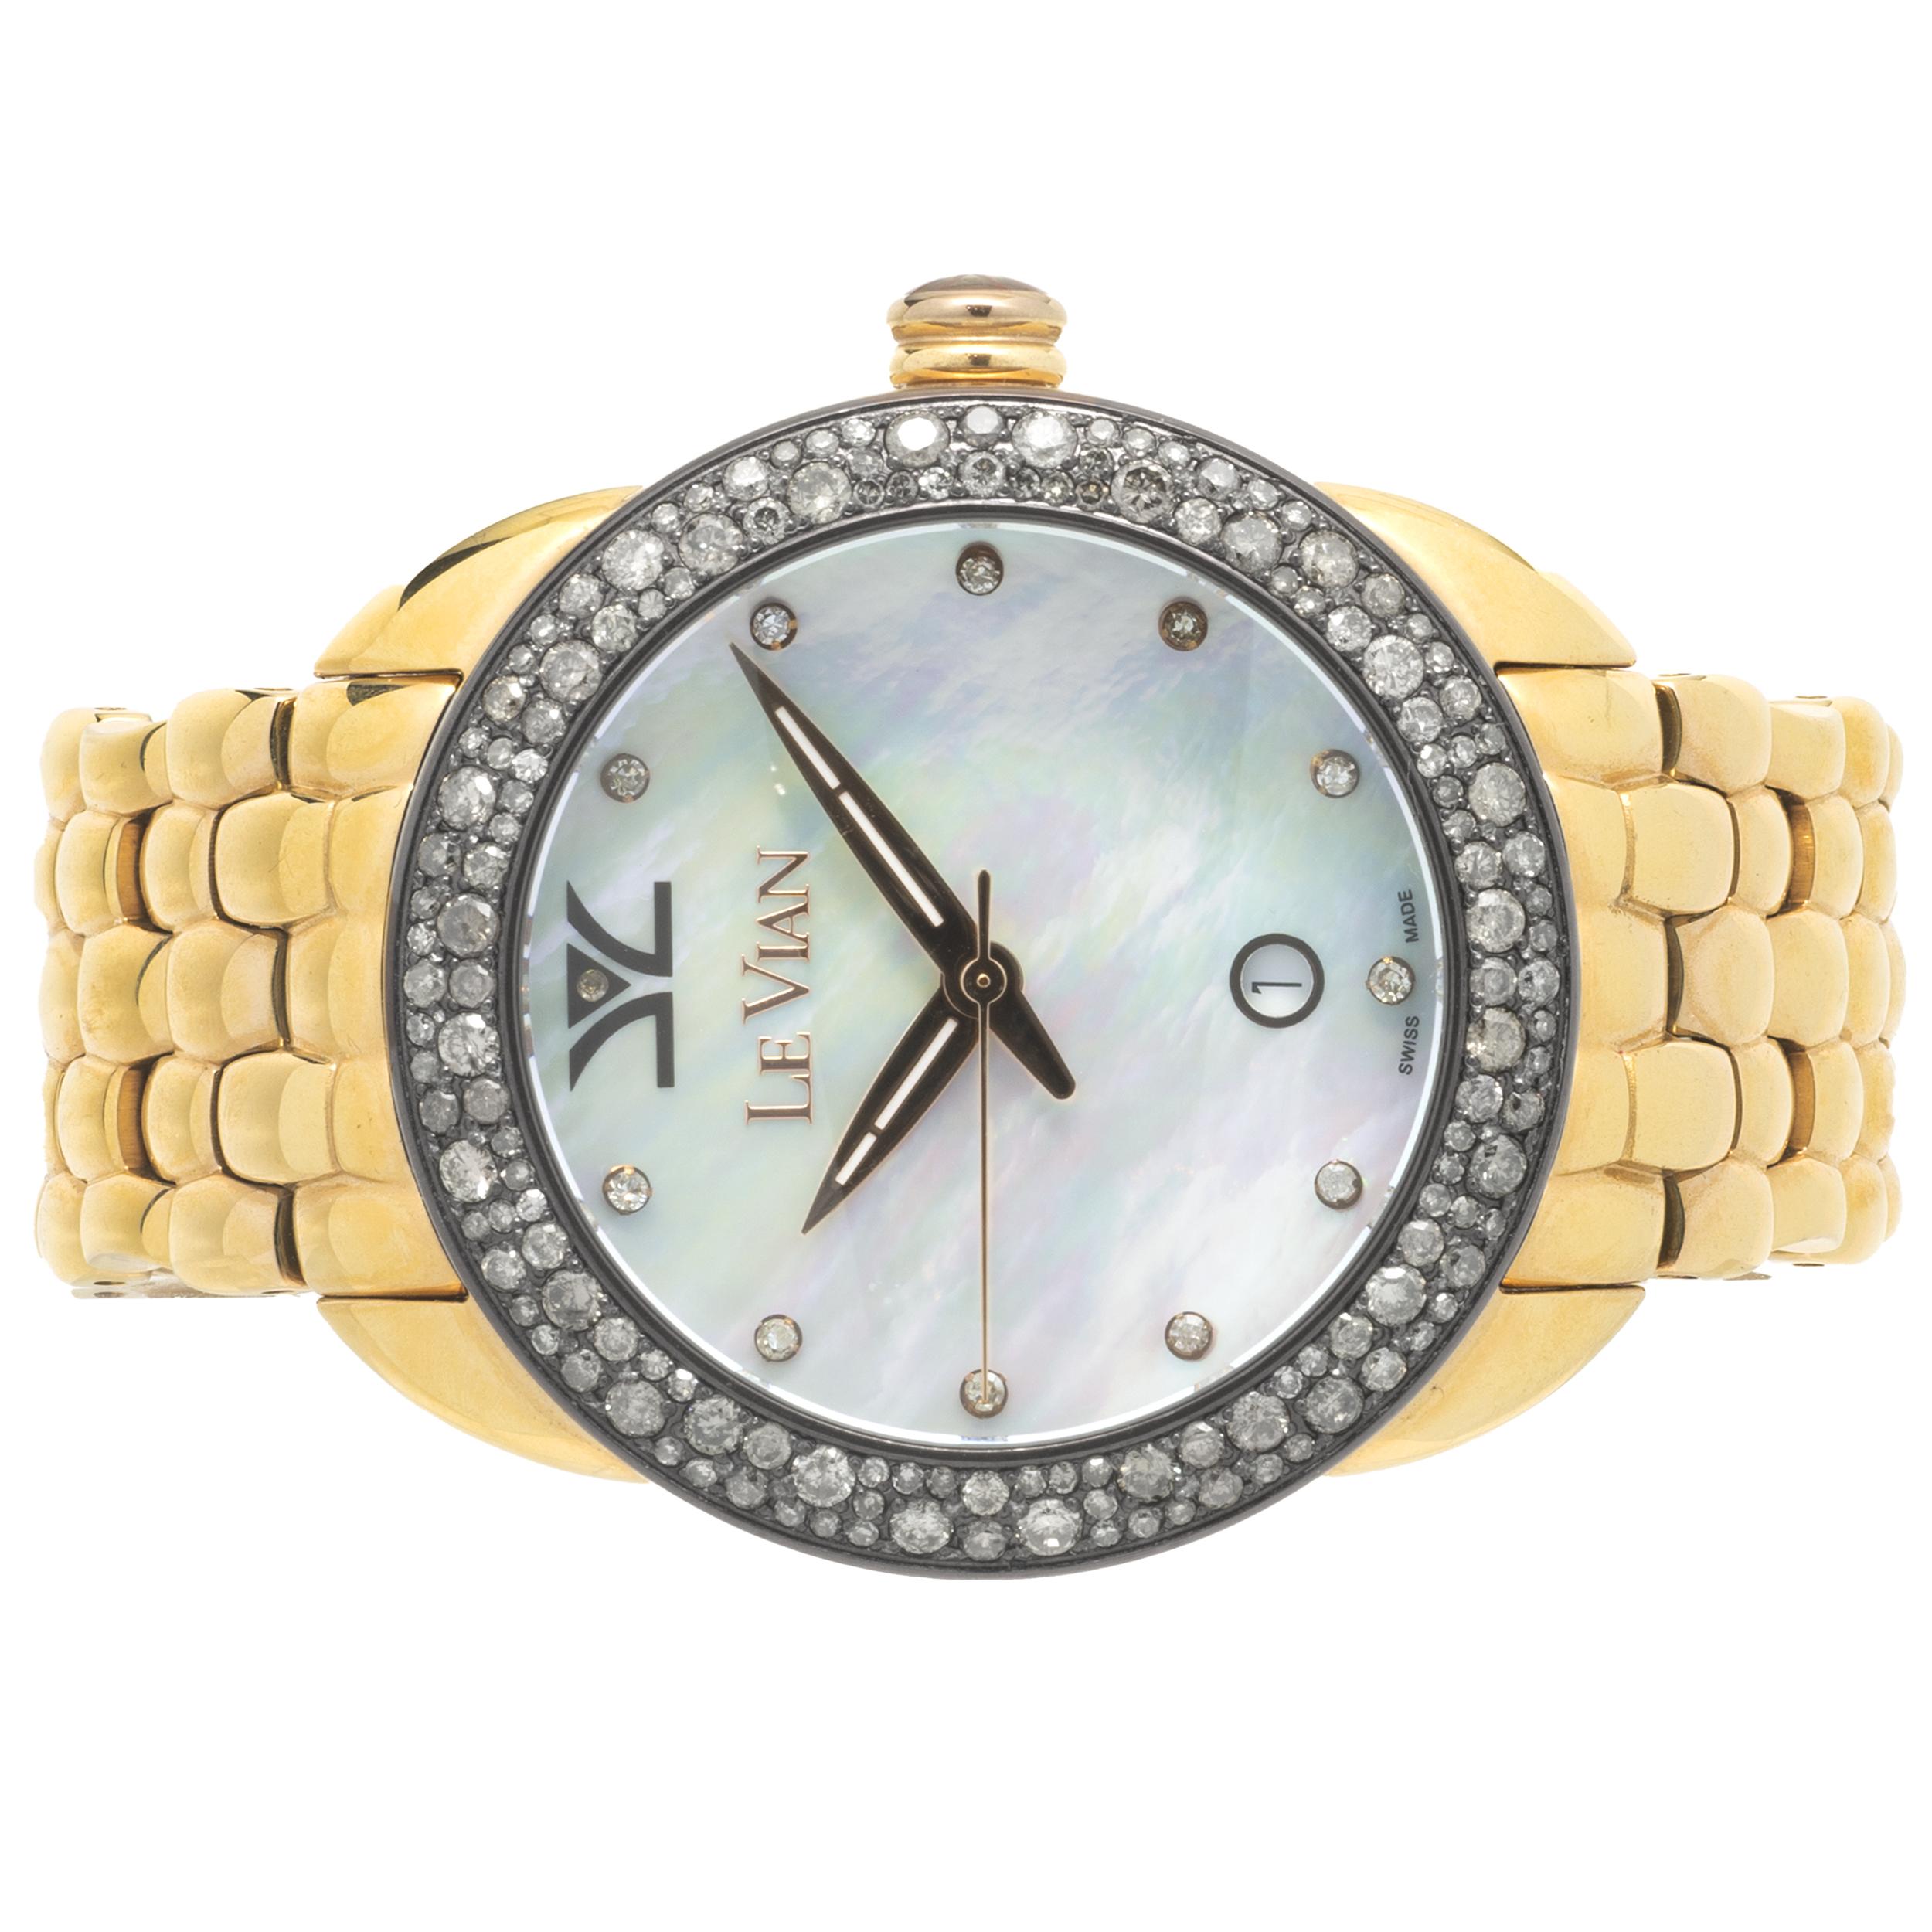 Movement: quartz
Function: hours, minutes, seconds date
Dial: mother of pearl diamond dial
Serial # LV9XXX-XXX
Measurement: watch will fit up to a 7.25-inch wrist

Complete with box, no papers
Guaranteed to be authentic by seller.
